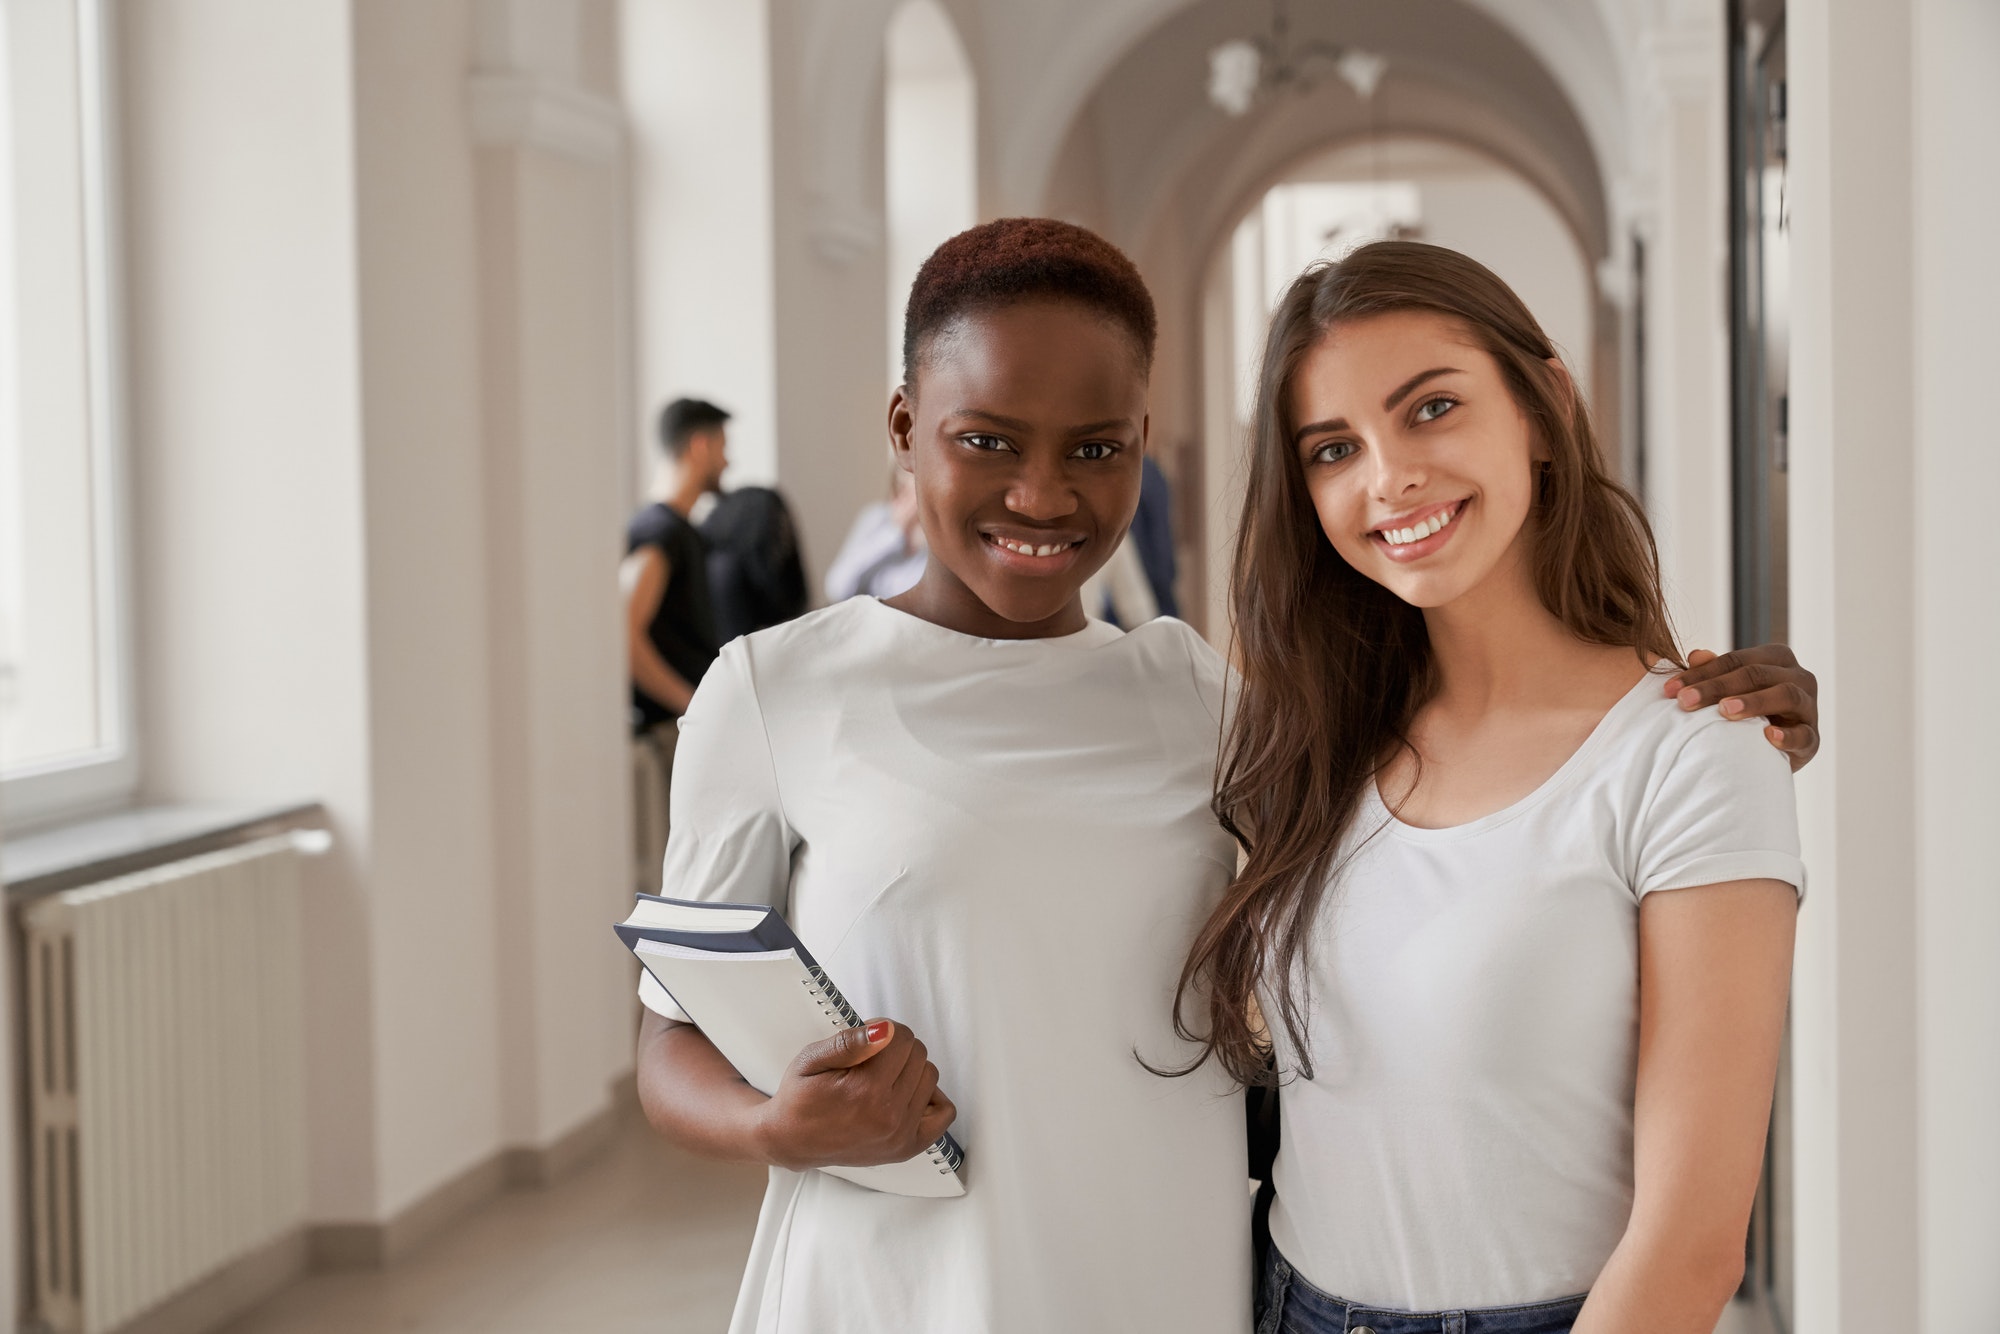 Female students African and Caucasian embracing